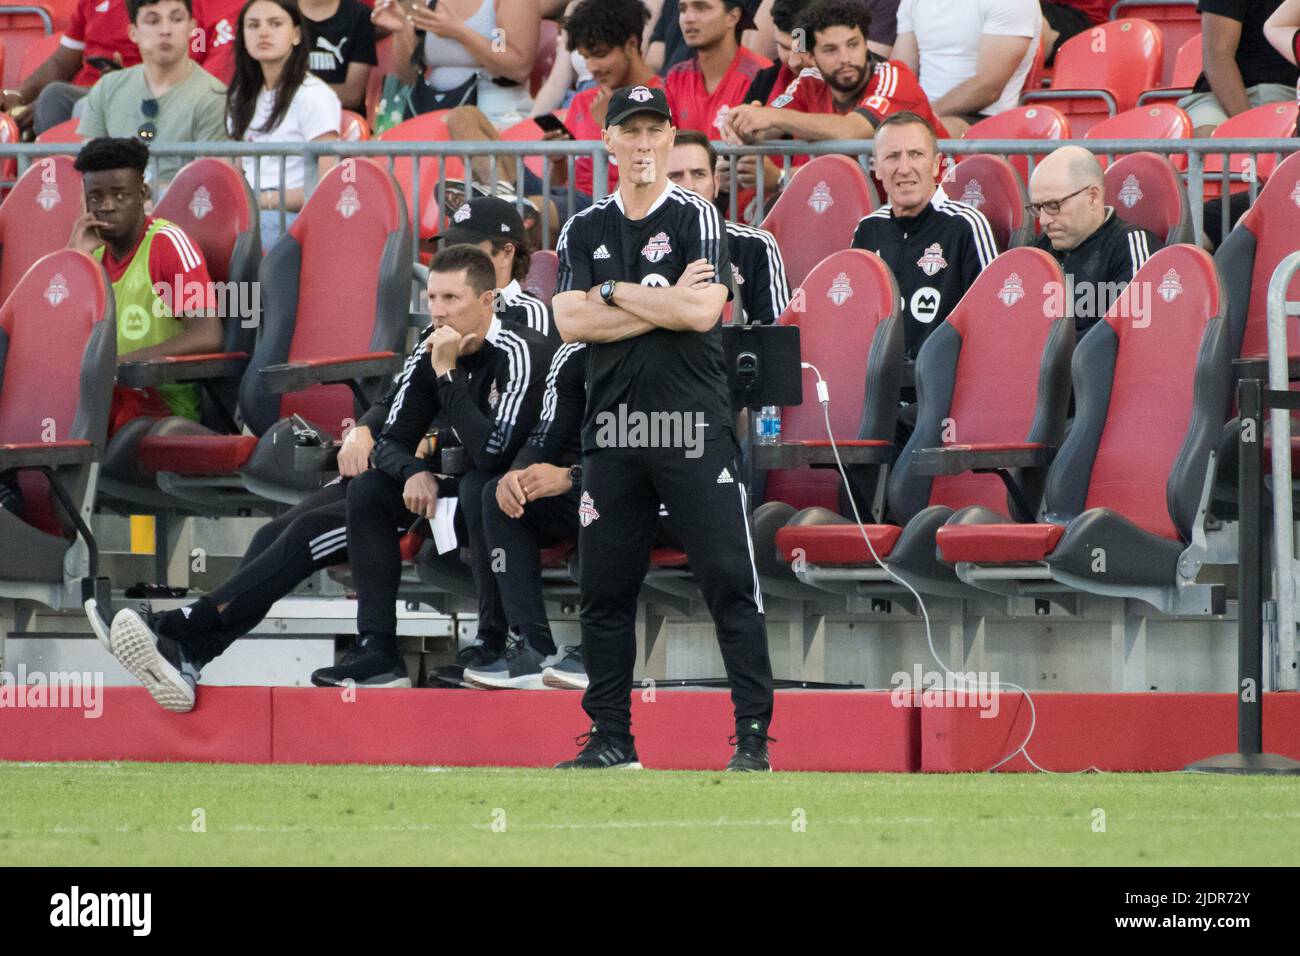 Toronto, Canada. 22nd June, 2022. TFC coach of Toronto Bob Bradley (Robert Frank Bradley) watches as his team plays during the Canadian Championship game between Toronto FC and CF Montreal at BMO Field. The game ended 4-0 for Toronto FC. (Photo by Angel Marchini/SOPA Images/Sipa USA) Credit: Sipa USA/Alamy Live News Stock Photo